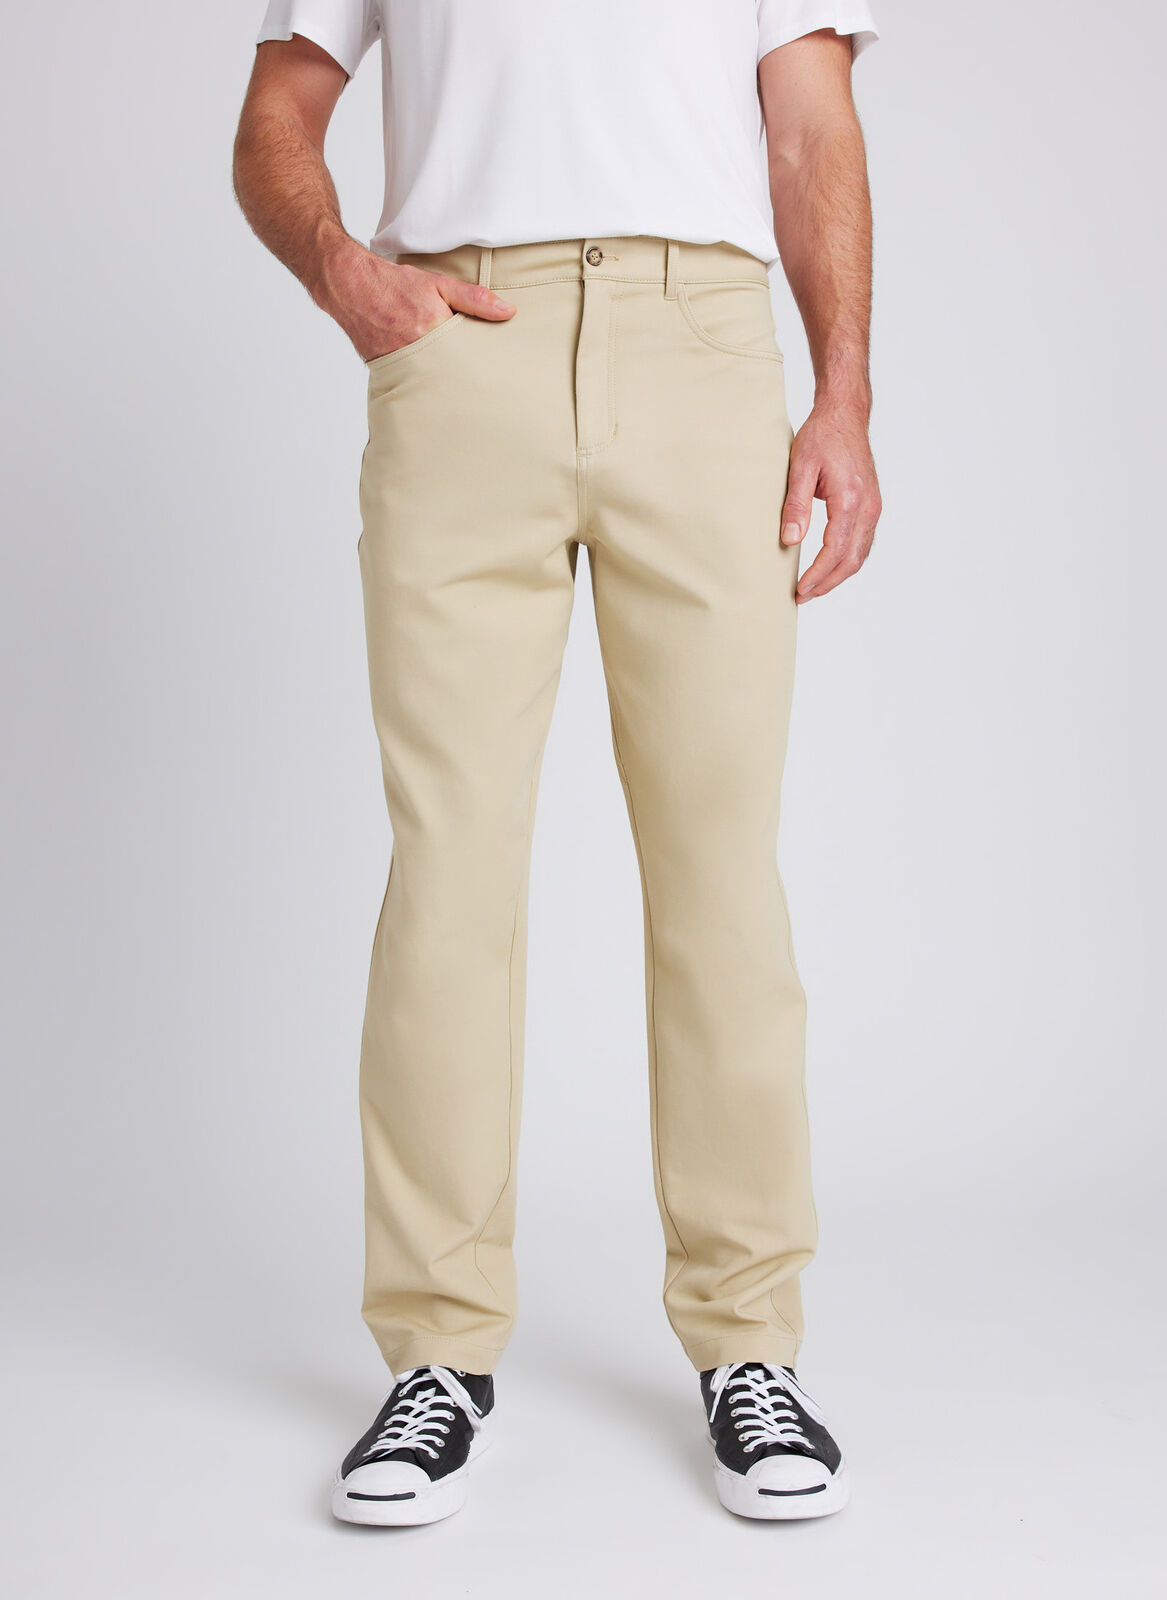 SUV 5 Pocket Pants Relaxed Fit ?? Model:: Ronan | 32 || Sand Dune